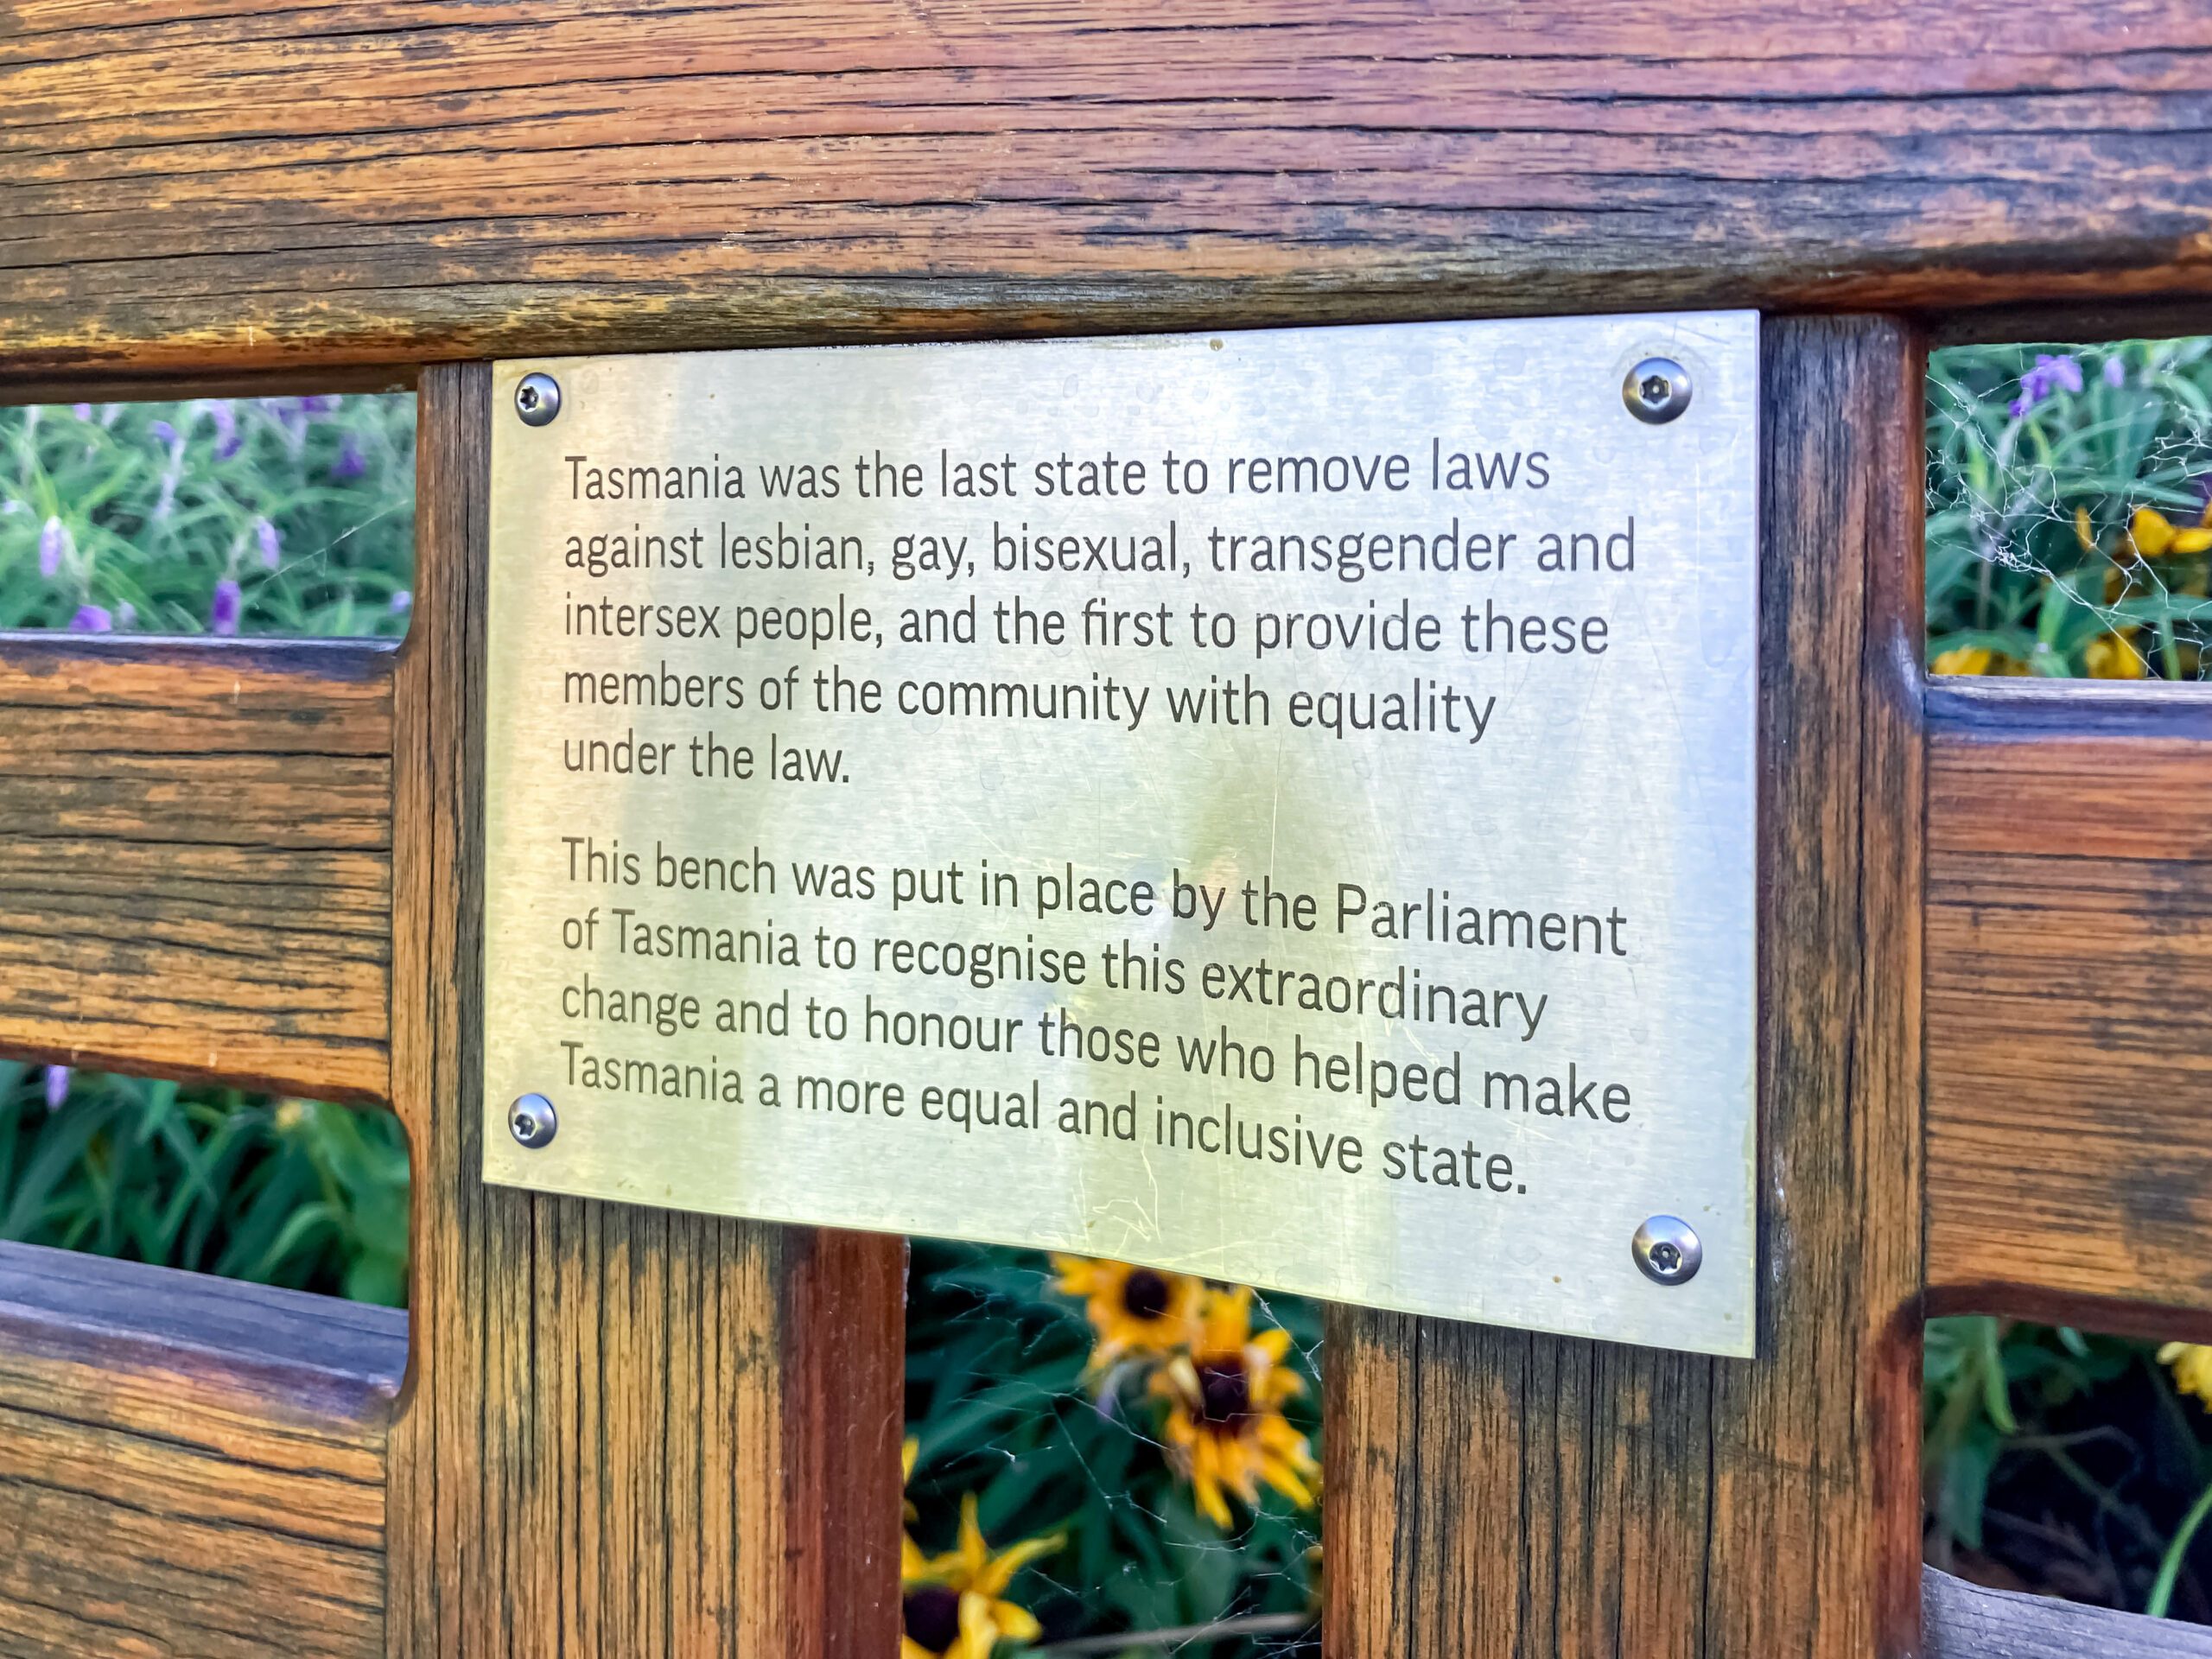 A brass plaque attached to a wooden bench recognising Tasmania as the last state to remove laws against lesbian, gay, bisexual, transgender and intersex people and the first to provide these members of the community with equality under the law